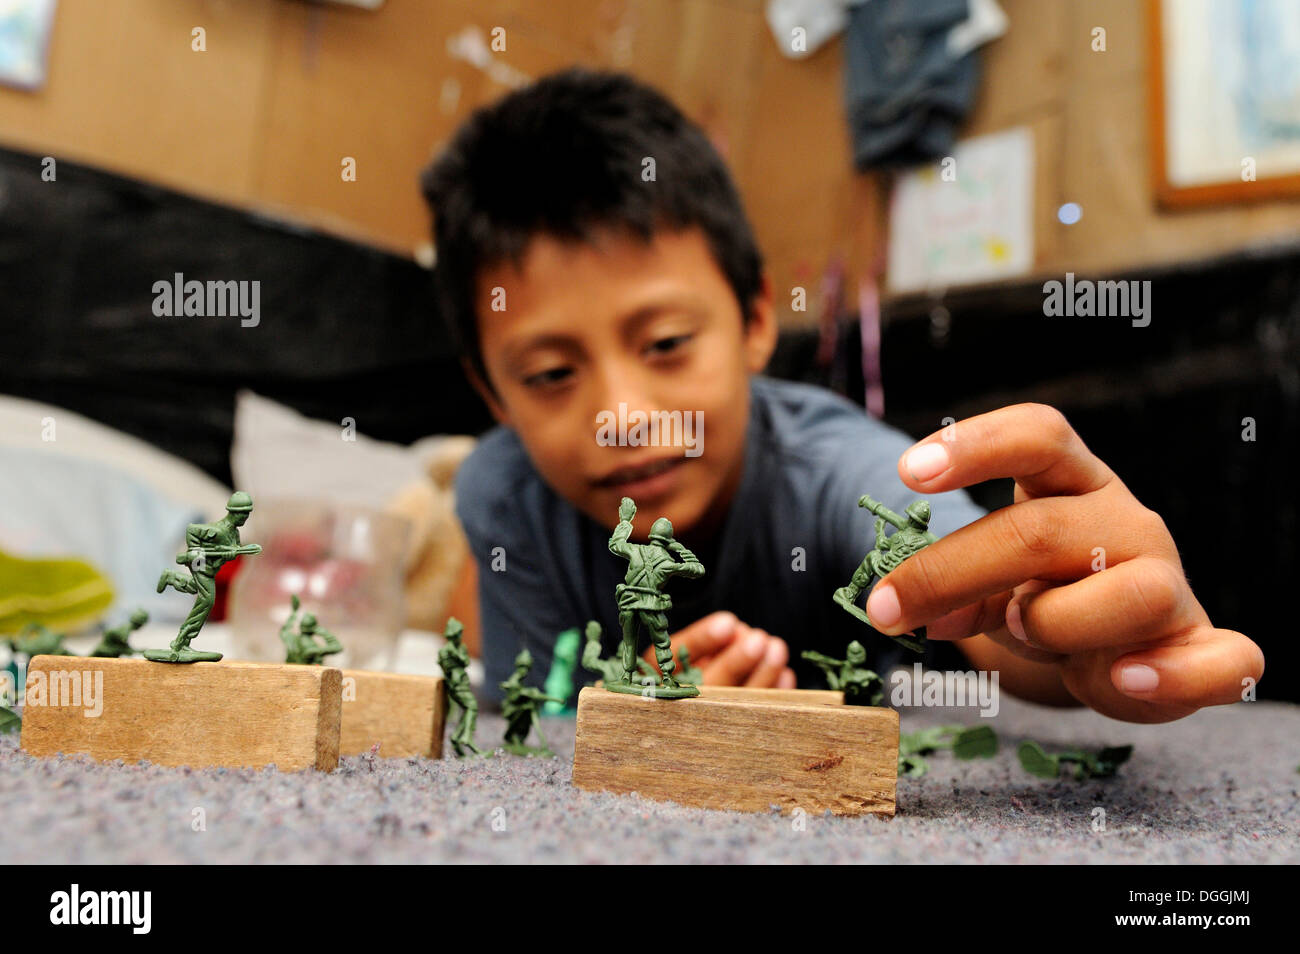 Boy playing with plastic toy soldiers, in a poor district of Cancun, Yucatan Peninsula, Quintana Roo, Mexico, Latin America Stock Photo